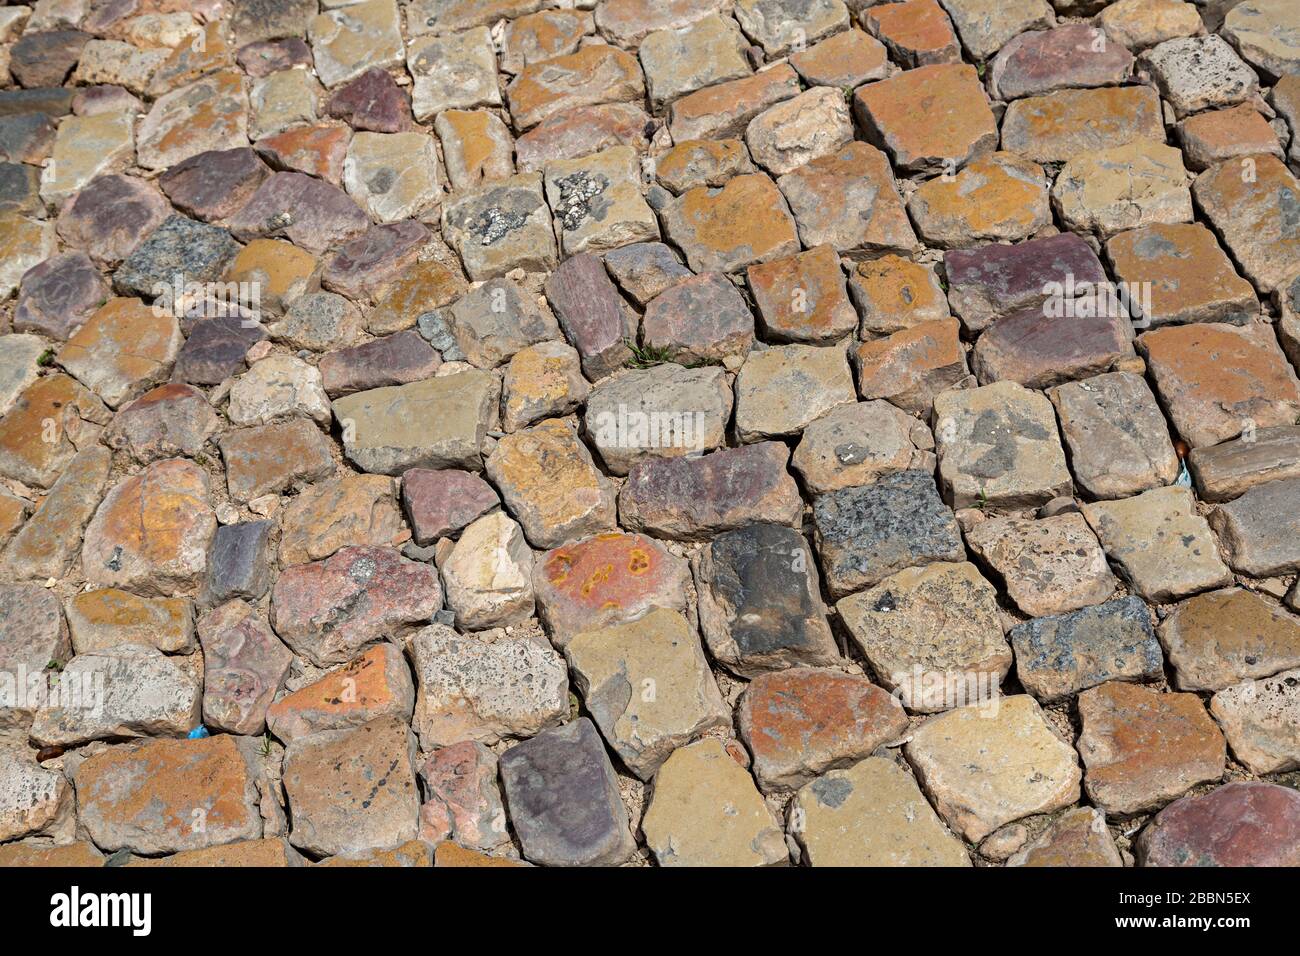 Polished stones used to make road surface, Silves, Algarve, Portugal Stock Photo